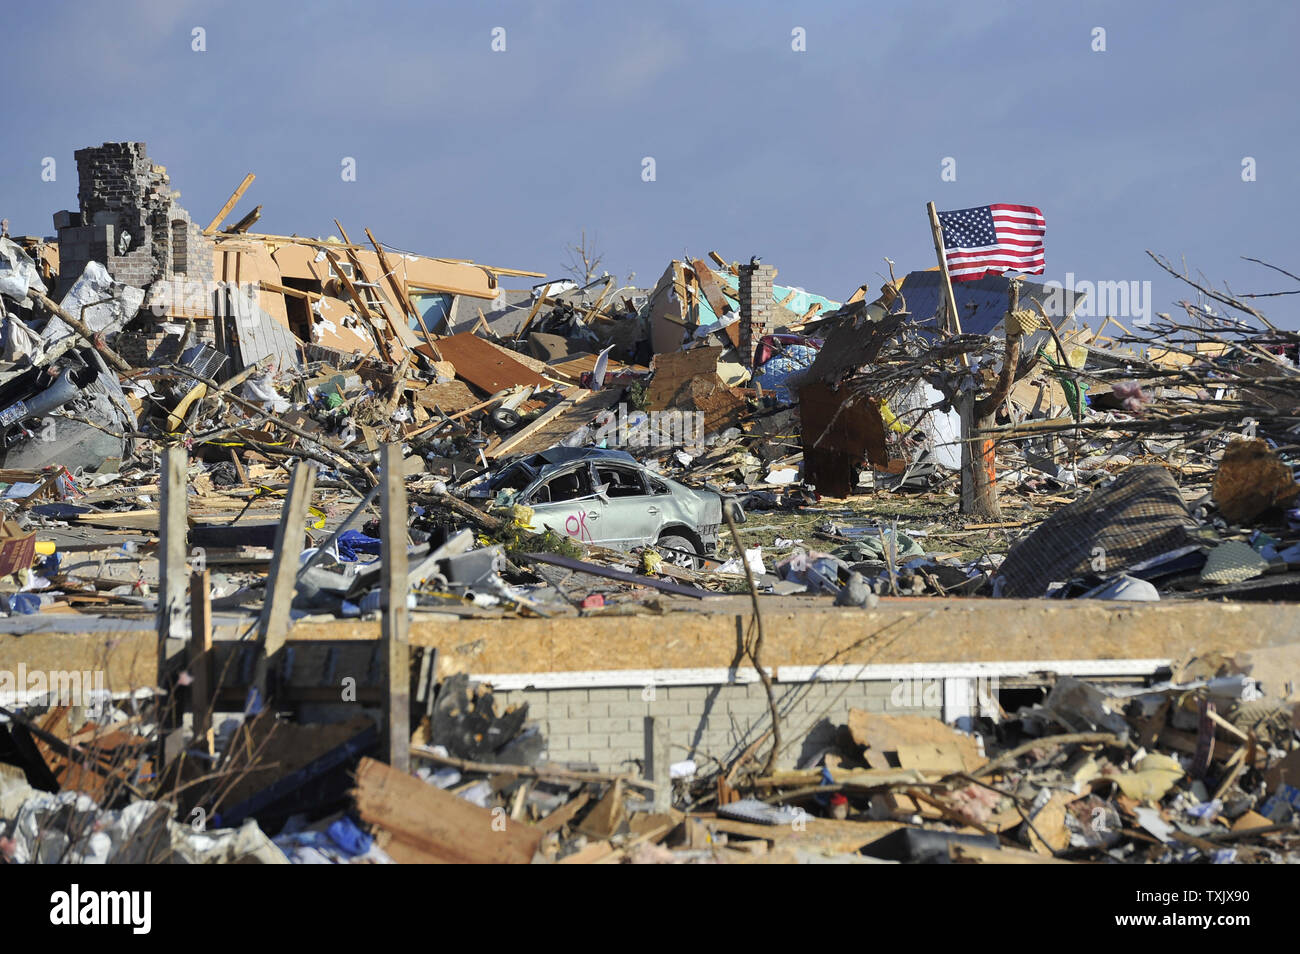 An American flag flies amid the devastation in Washington, Illinois on November 18, 2013. Six people died and hundreds of homes were destroyed in Illinois as 81 tornadoes were sighted on November 17 throughout 12 midwest states including the EF4 tornado that struck Washington, Illinois.     UPI/Brian Kersey Stock Photo